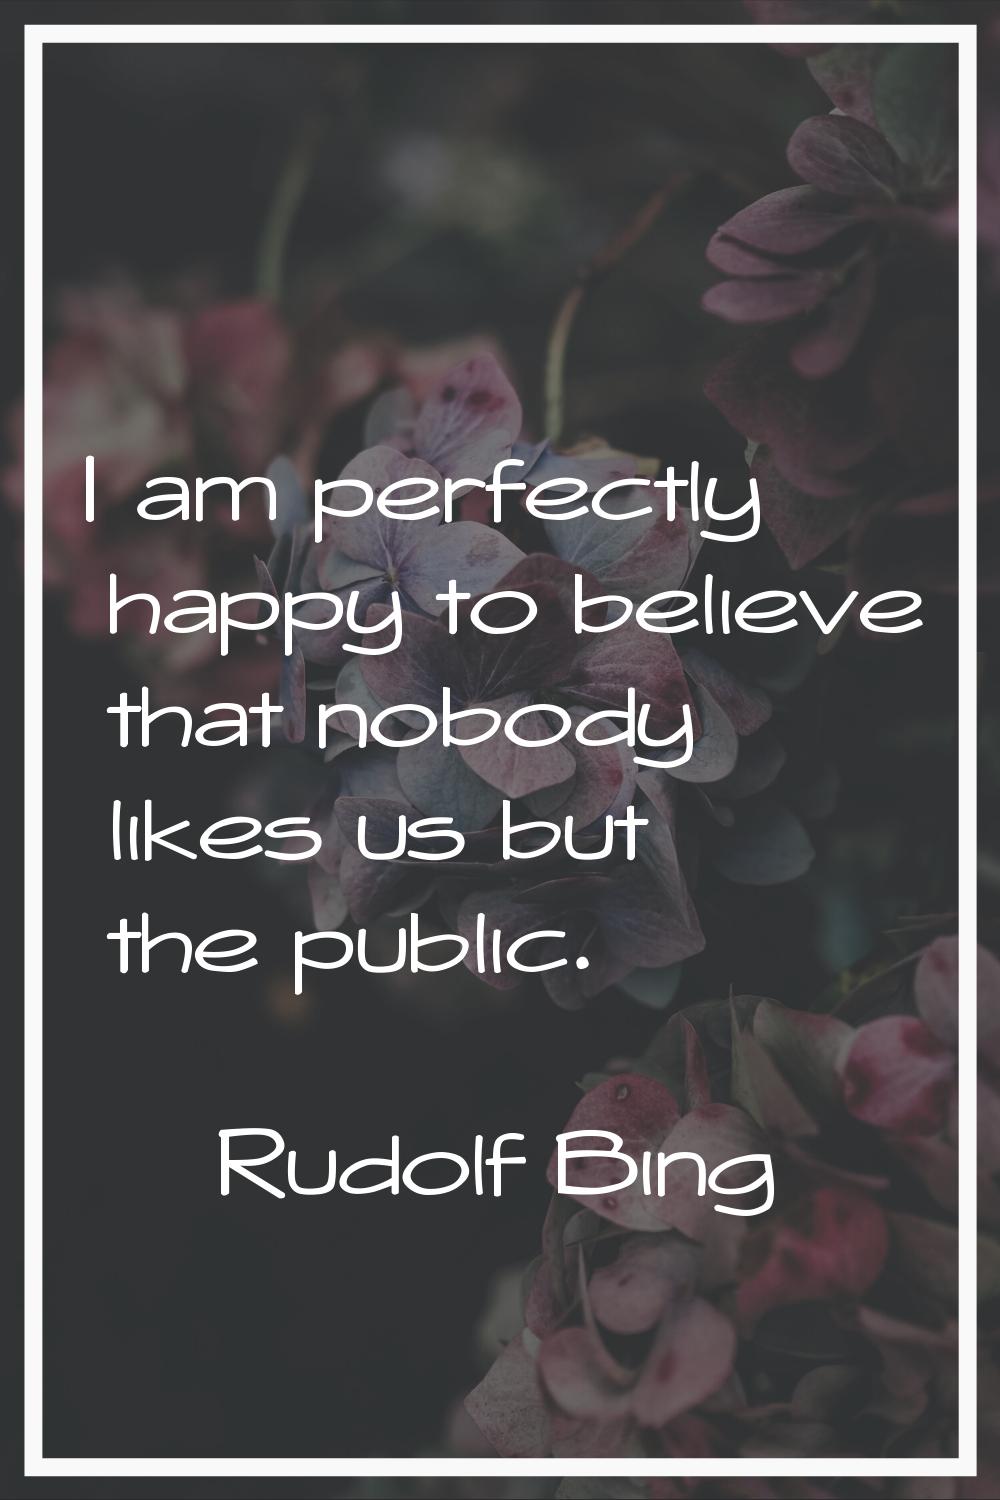 I am perfectly happy to believe that nobody likes us but the public.